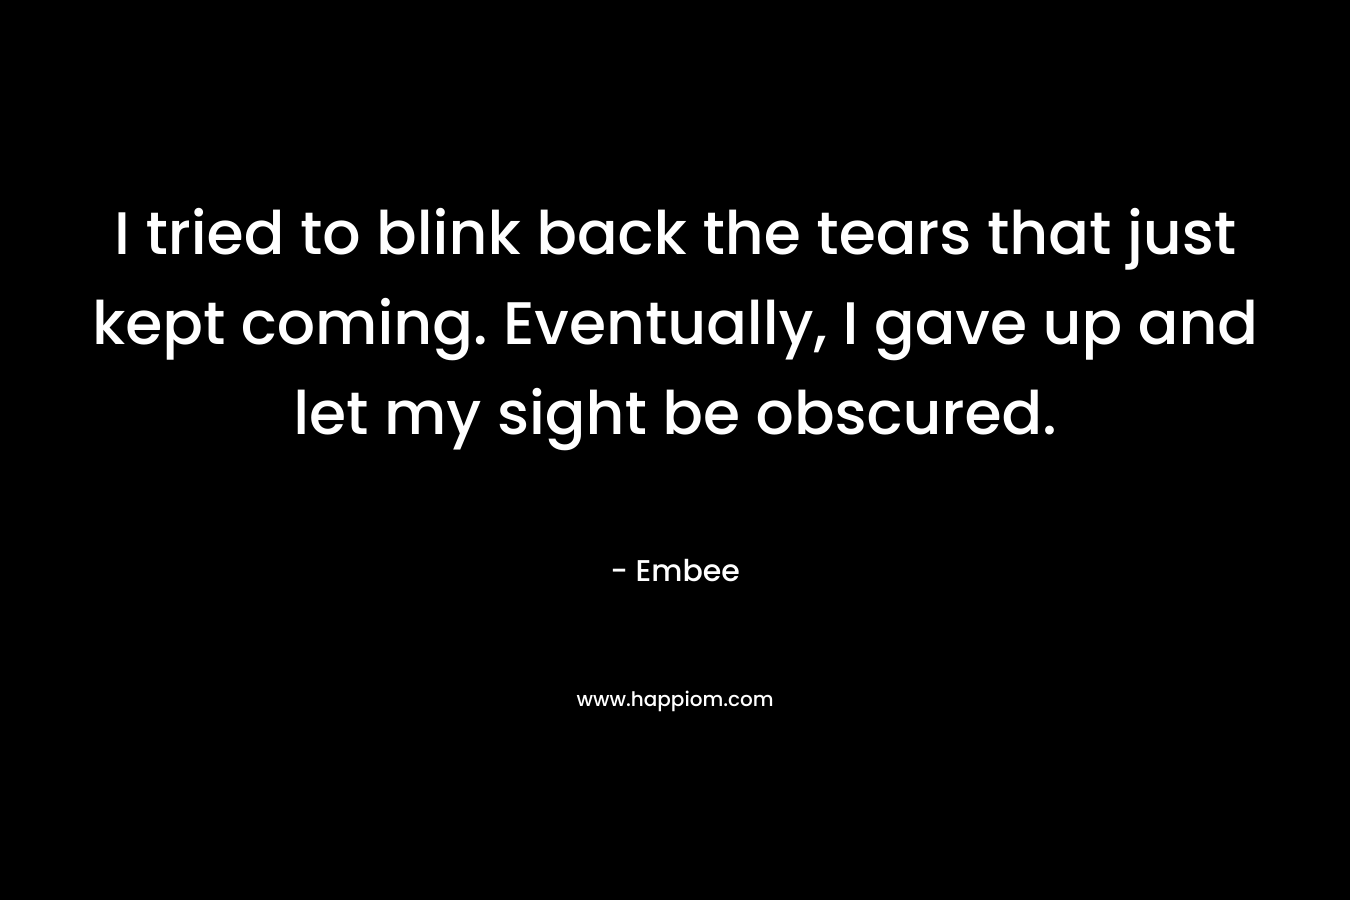 I tried to blink back the tears that just kept coming. Eventually, I gave up and let my sight be obscured.